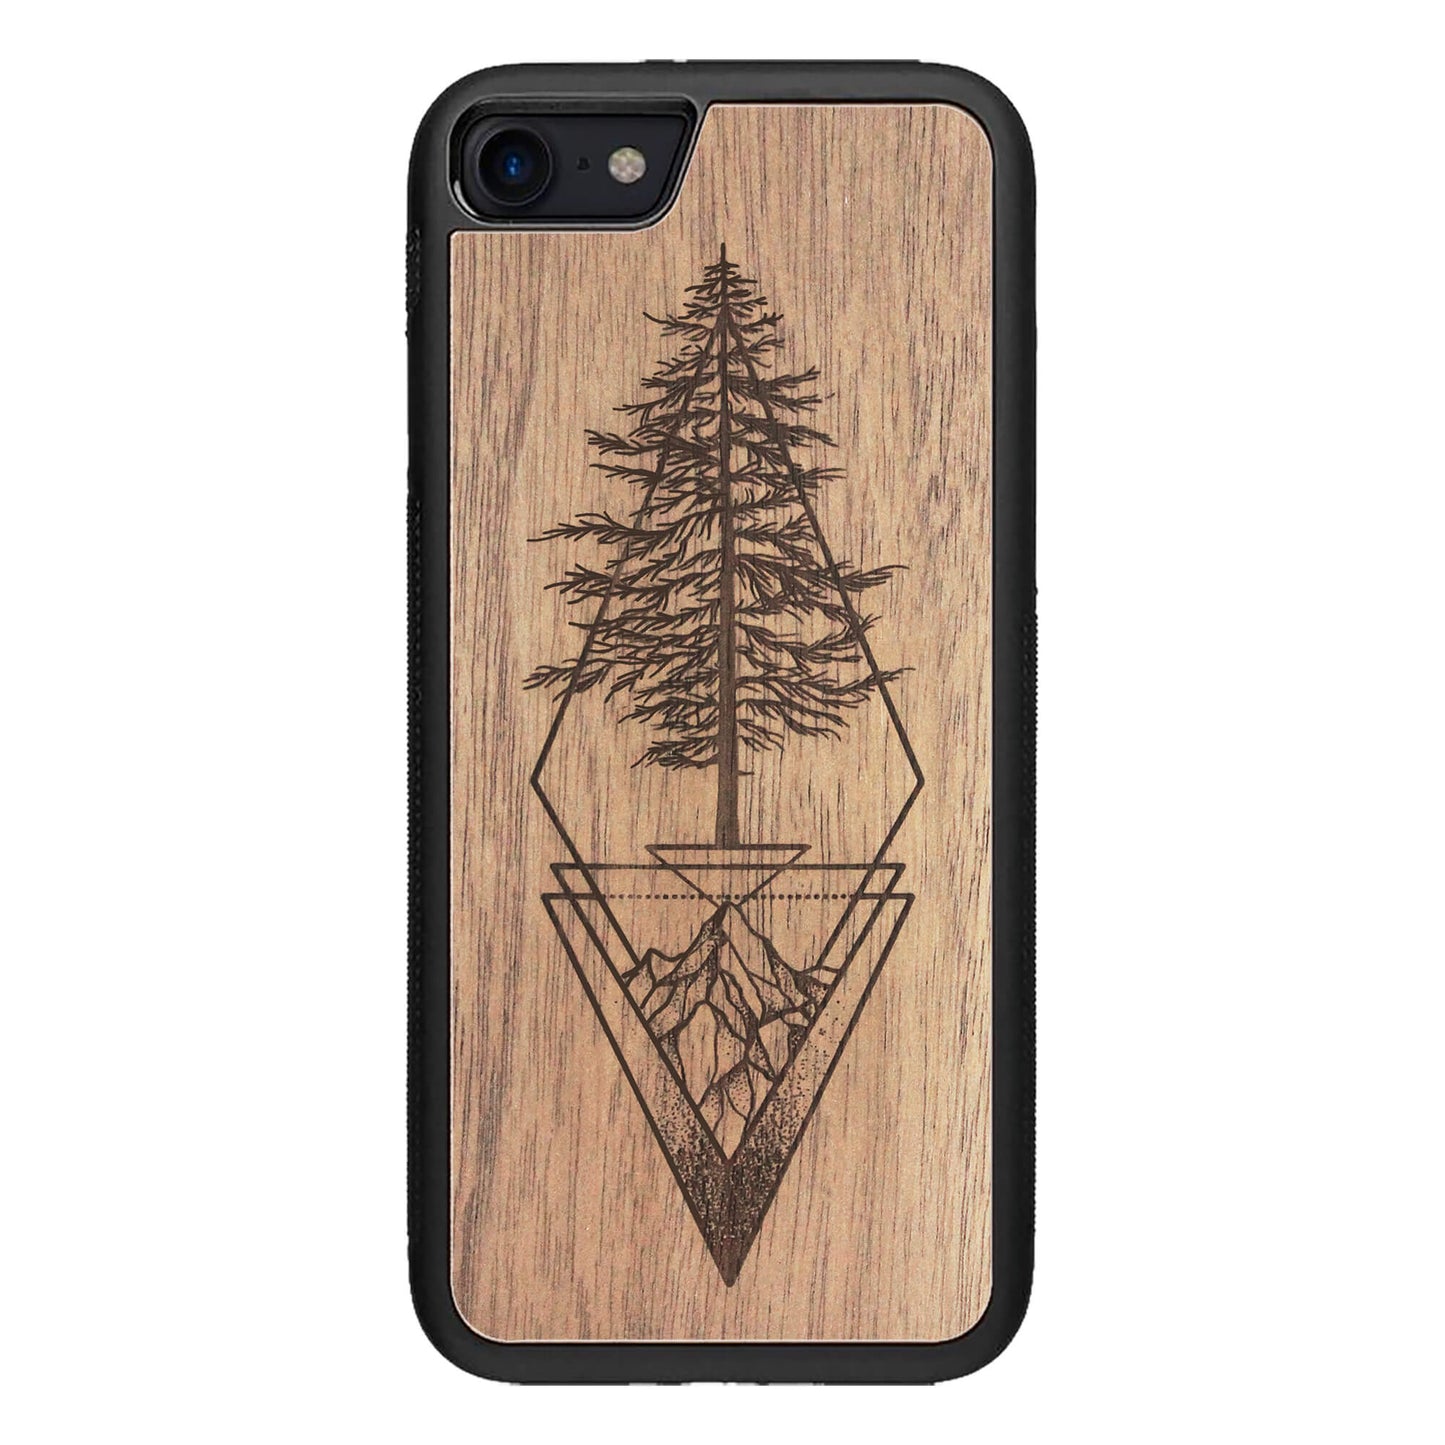 Wooden Case for iPhone SE 2 generation case Picea